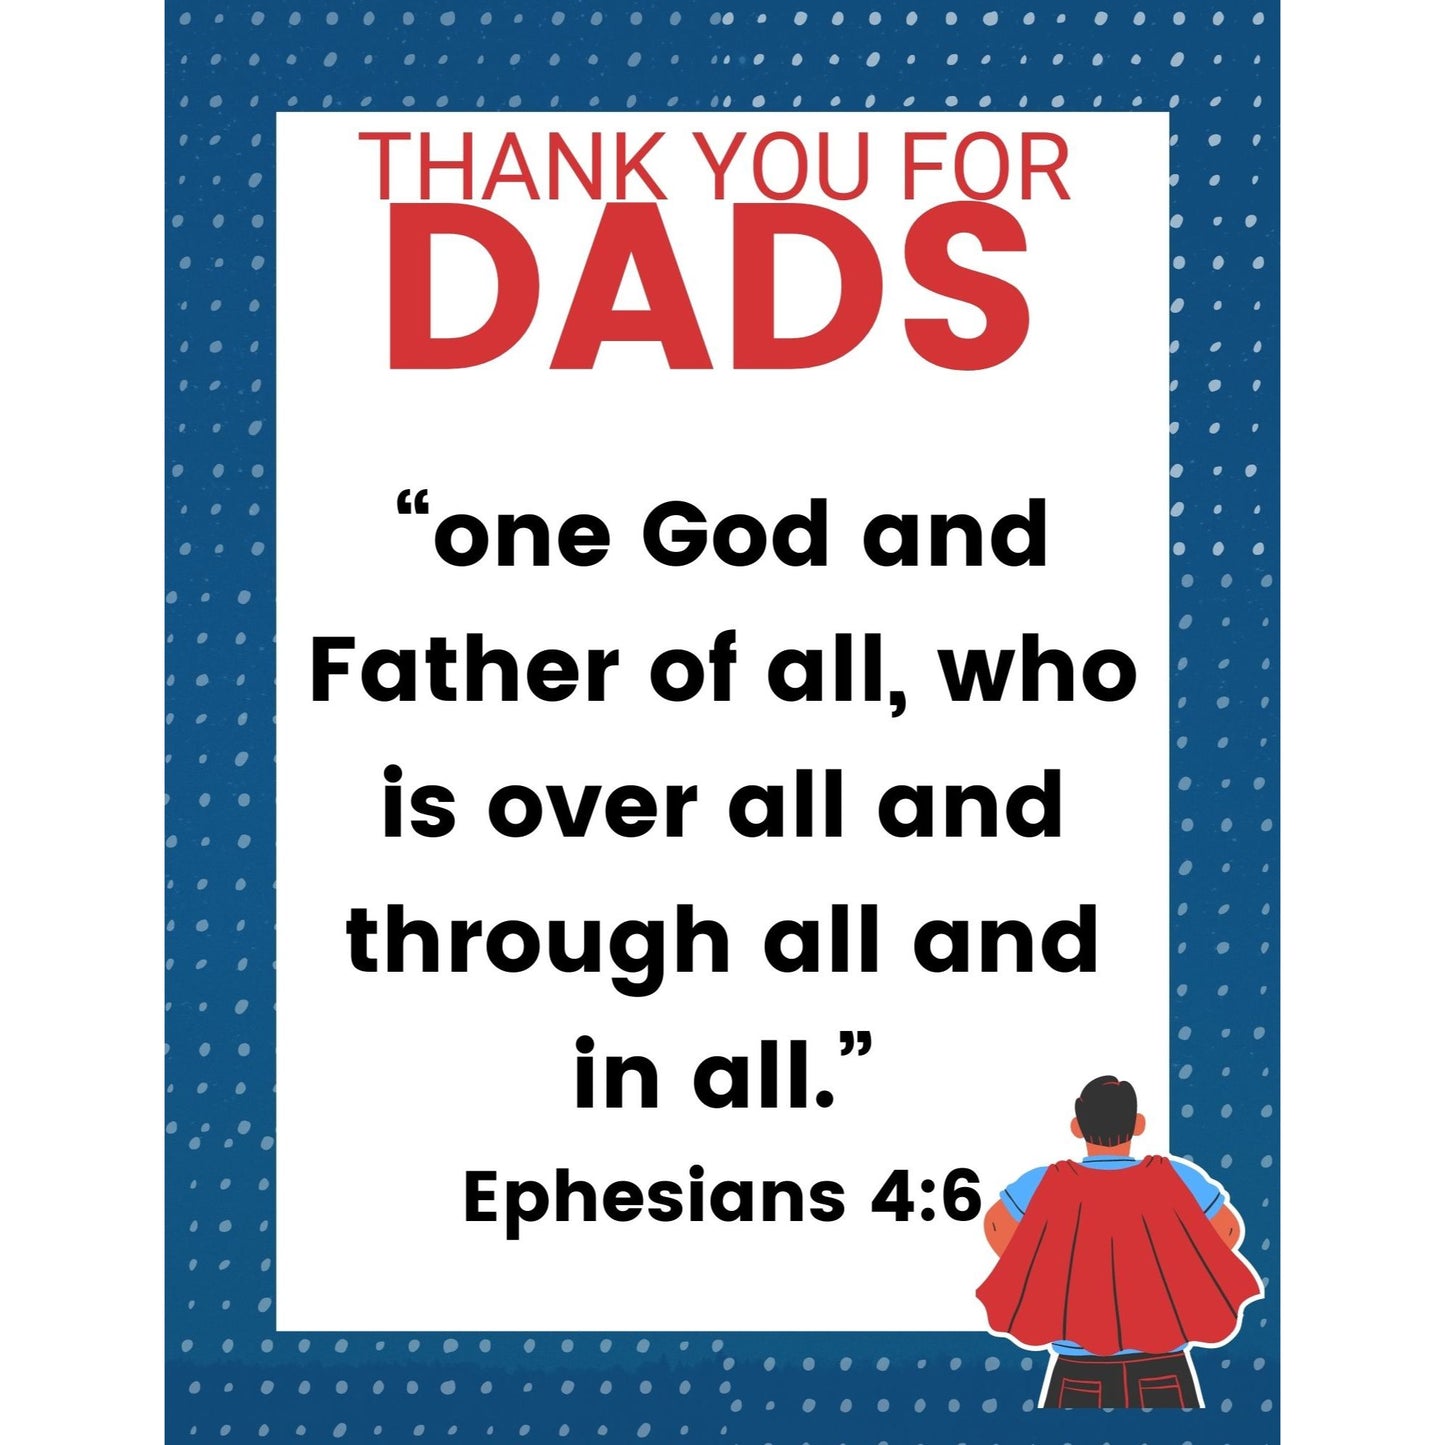 Thank You for Dads - Father's Day Bible Lesson for ages 2-5 (download only)